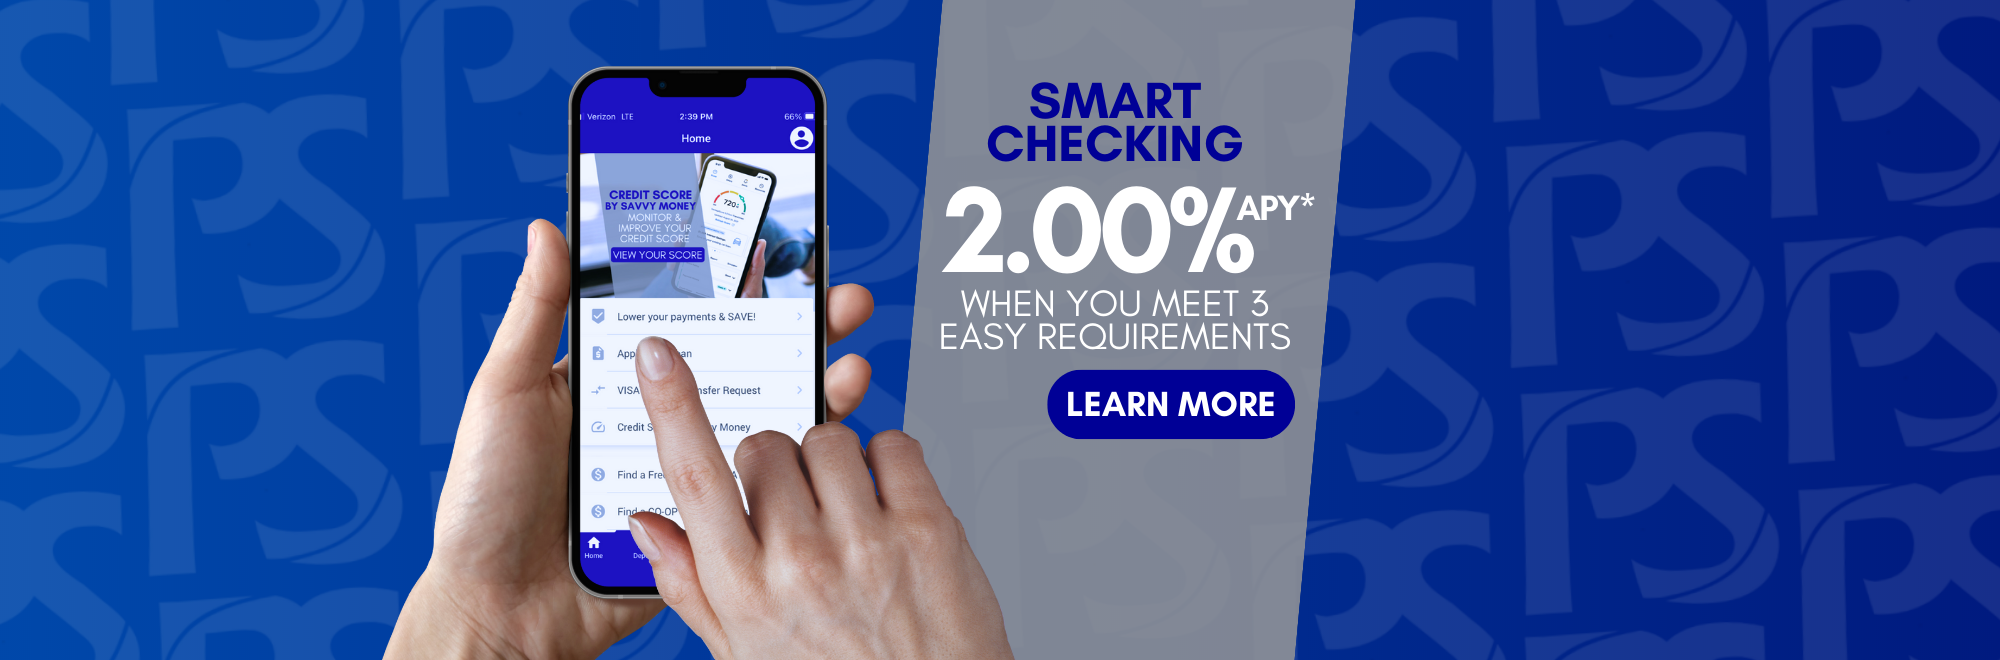 Smart Checking 2.00%APY* When you meet 3 easy requirements. click to learn more